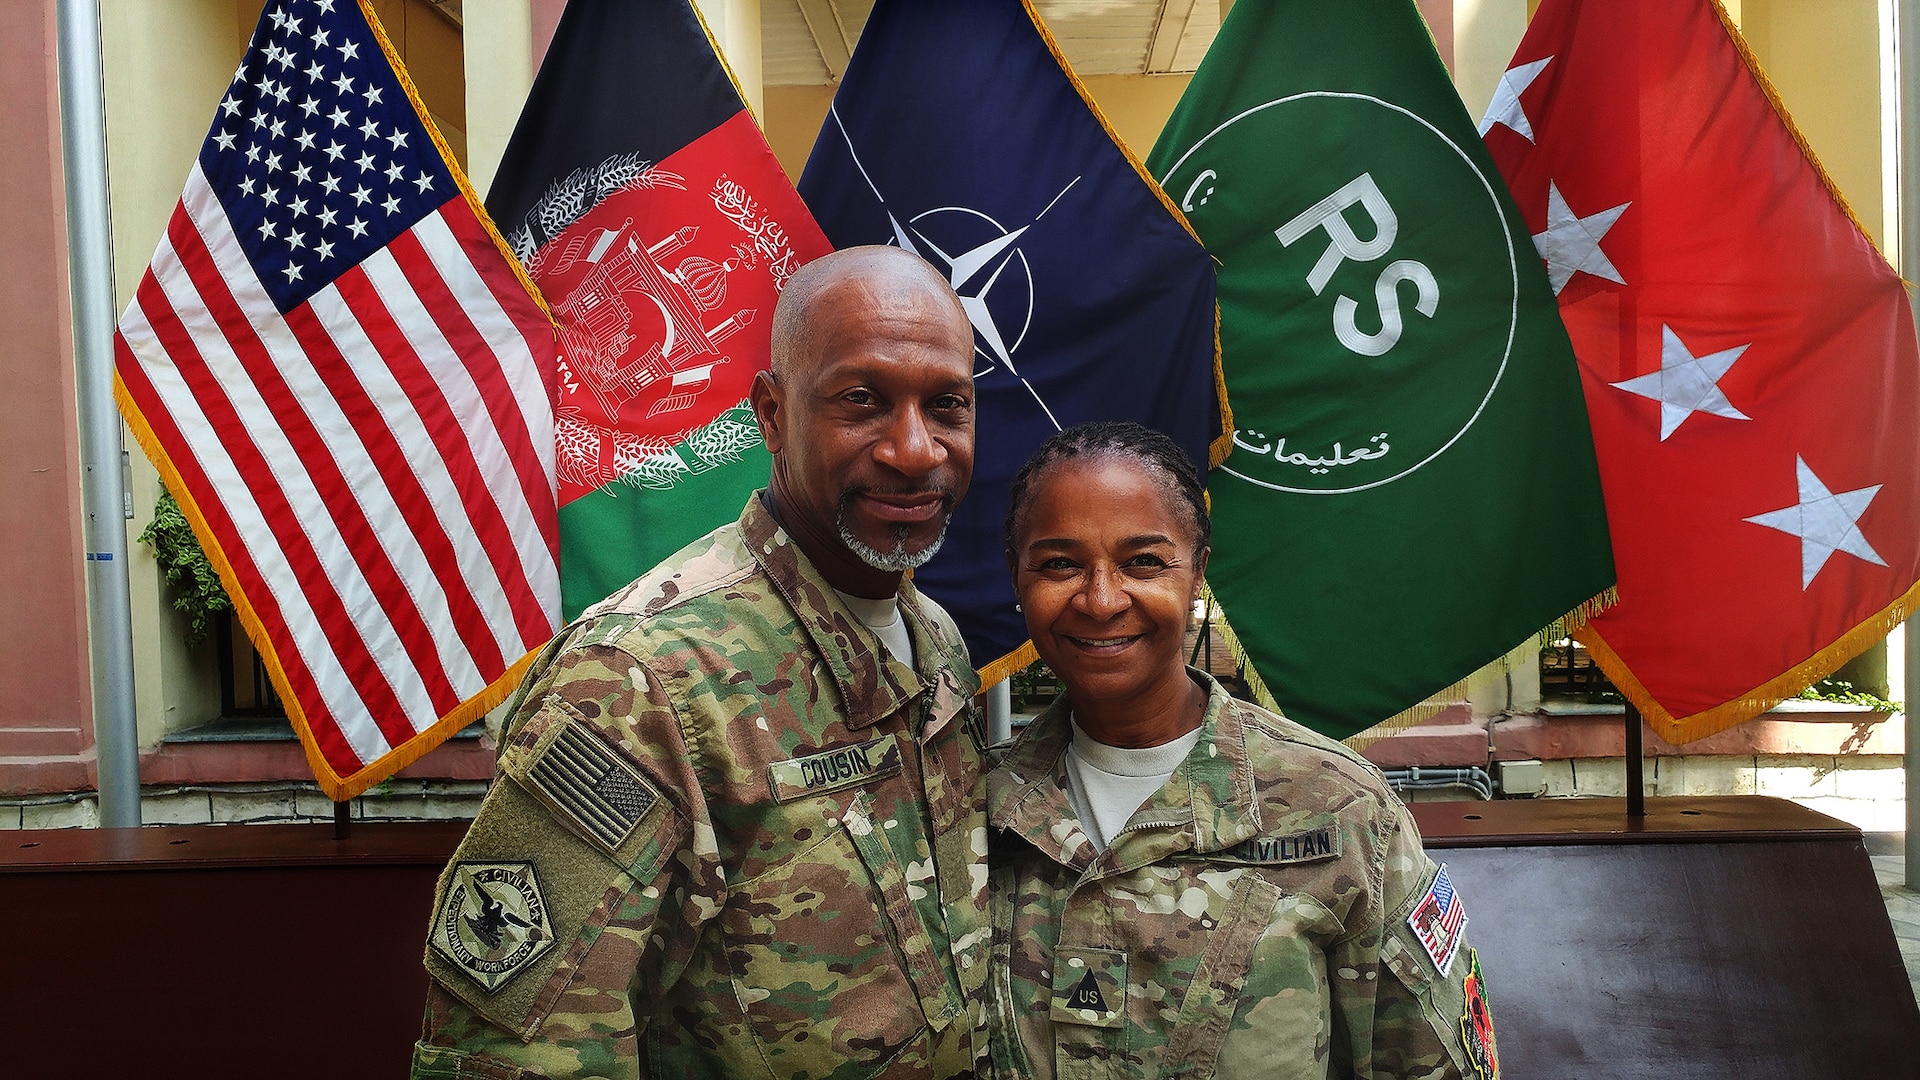 Darryl and Sandra Cousin from DLA Aviation pose for a photo while deployed to Afghanistan as part of the Civilian Expeditionary Workforce, a pool of DoD civilians who volunteer to deploy anywhere in the world for six months.